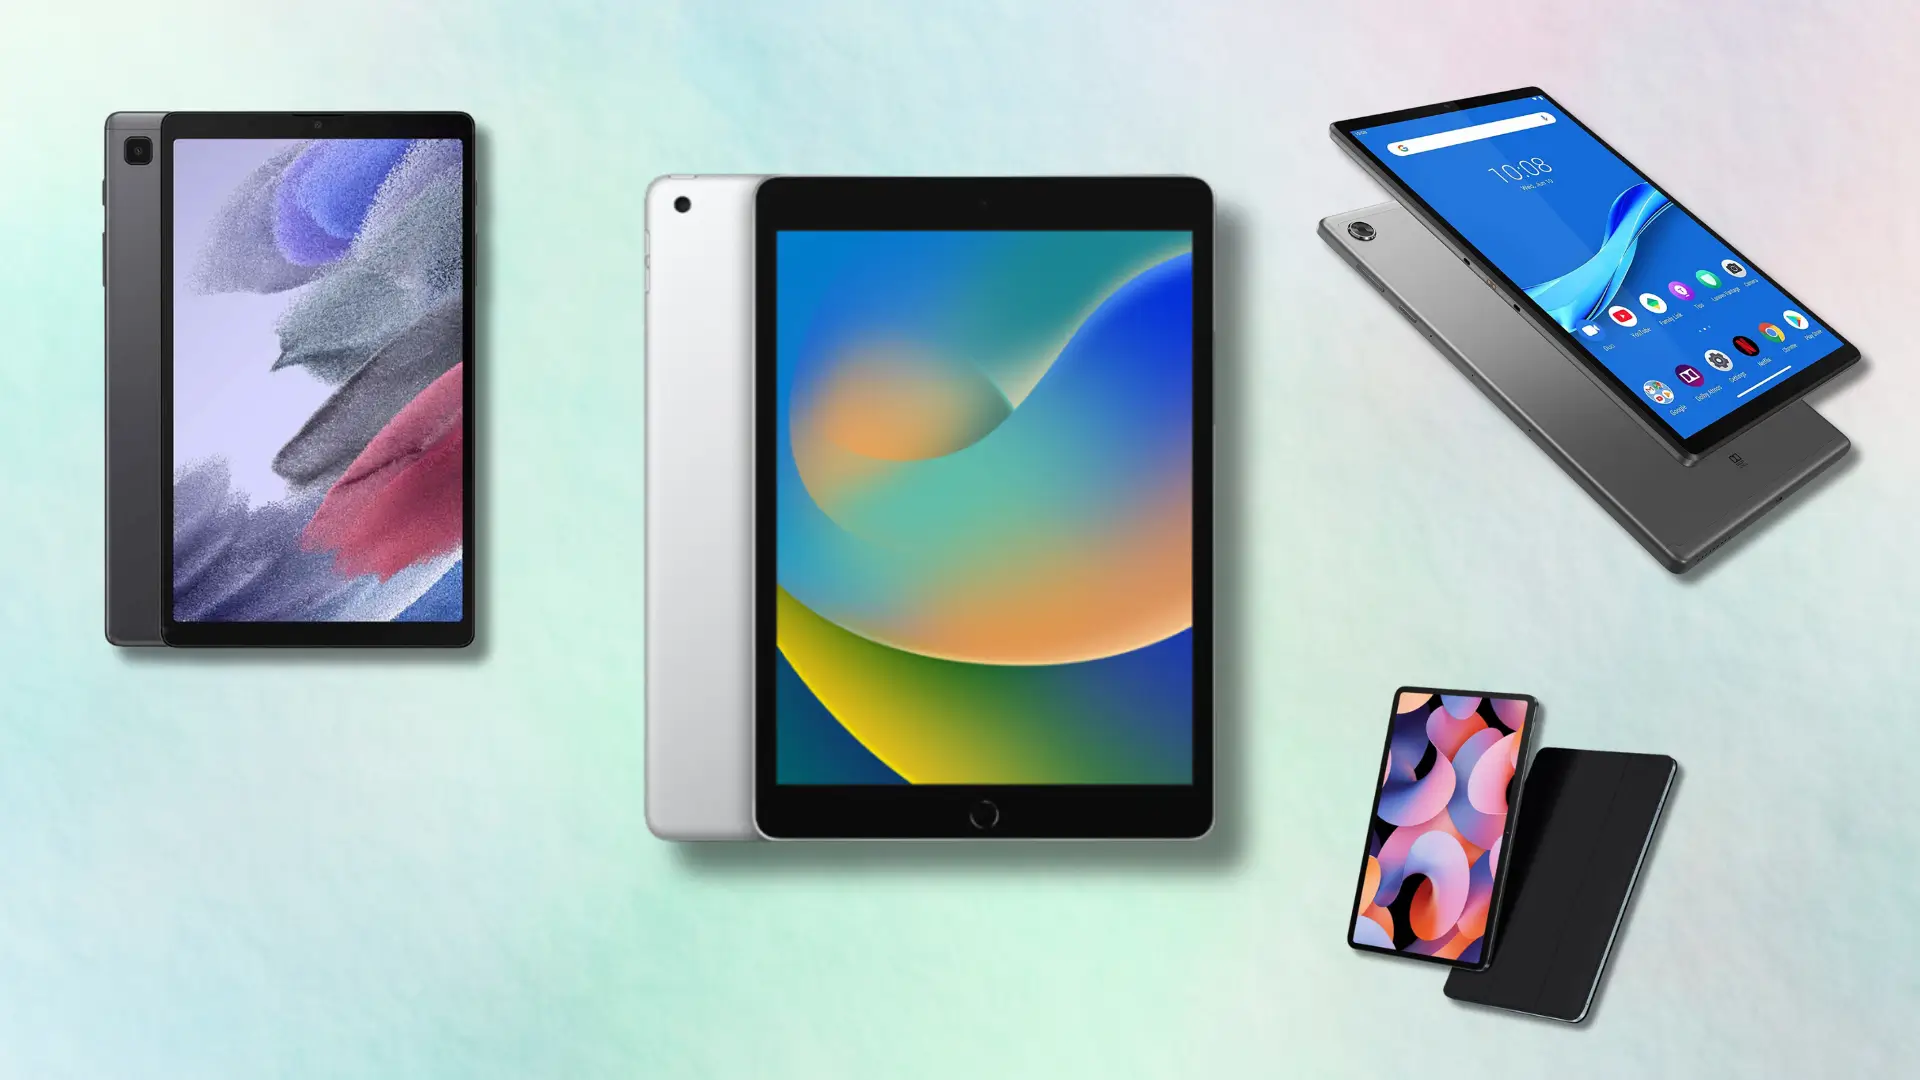 Apple Leads India’s Tablet Market followed by Lenovo and Samsung